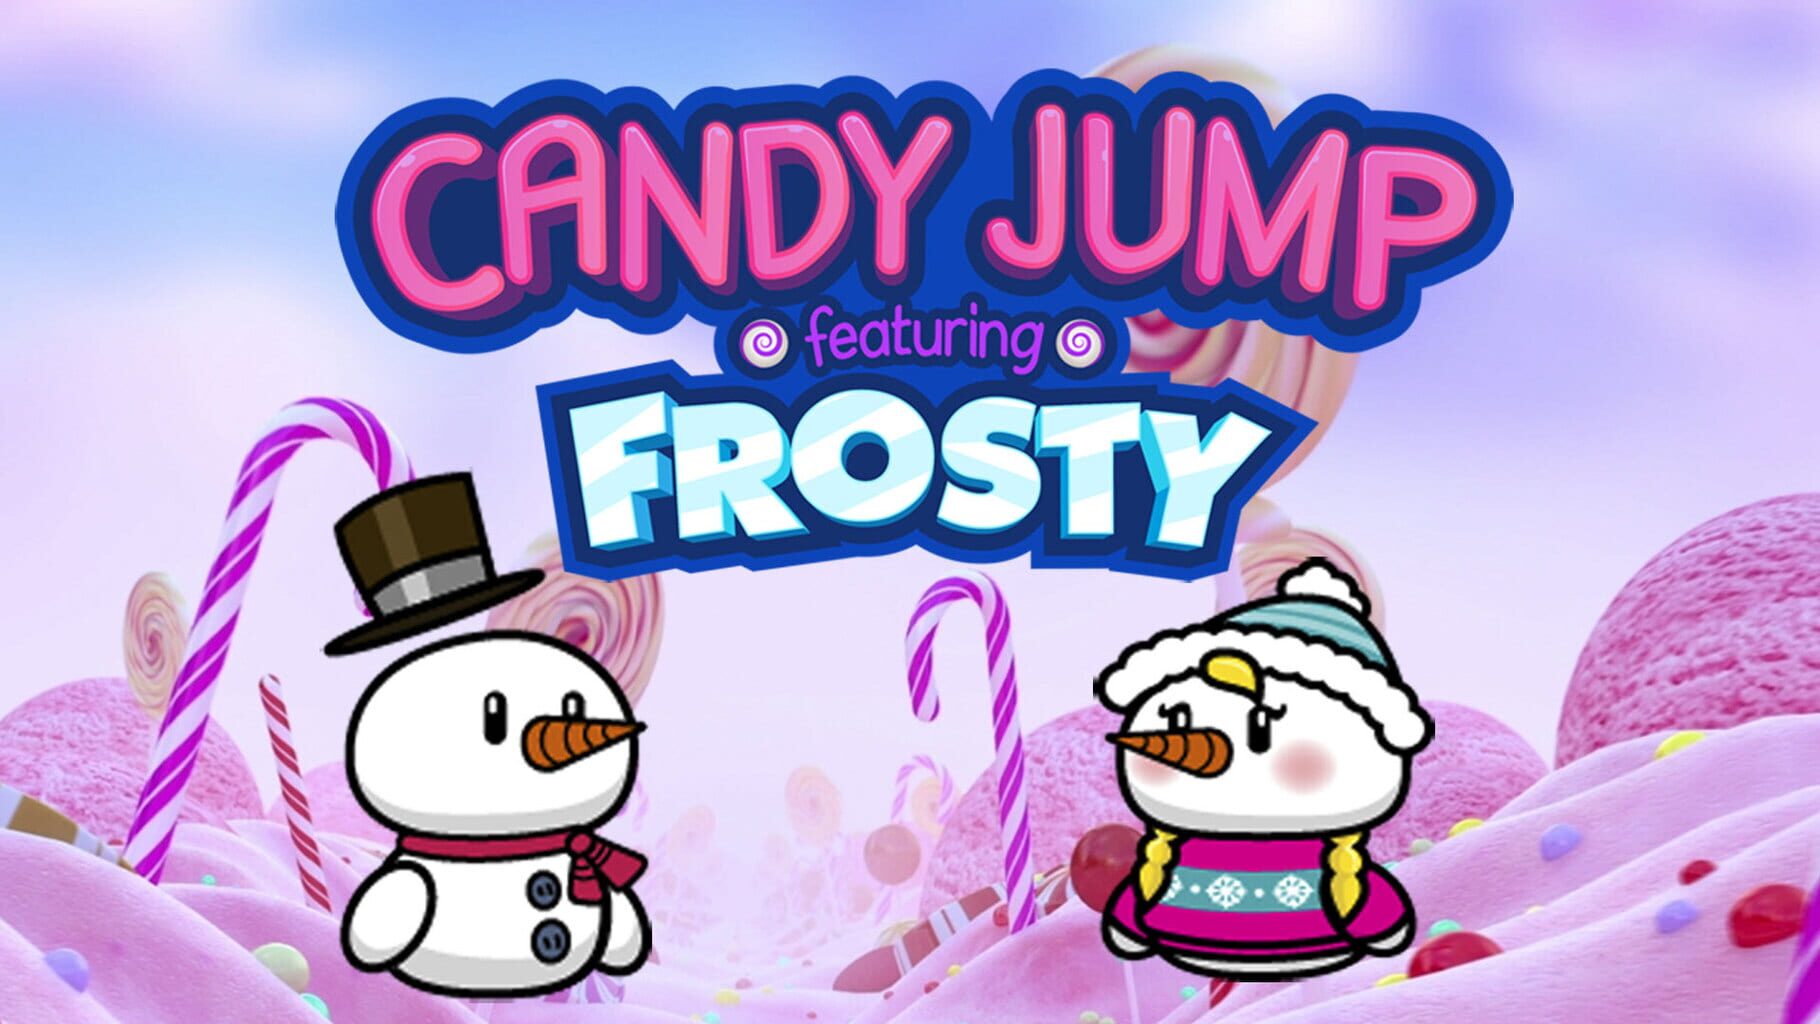 Candy Jump featuring Frosty artwork